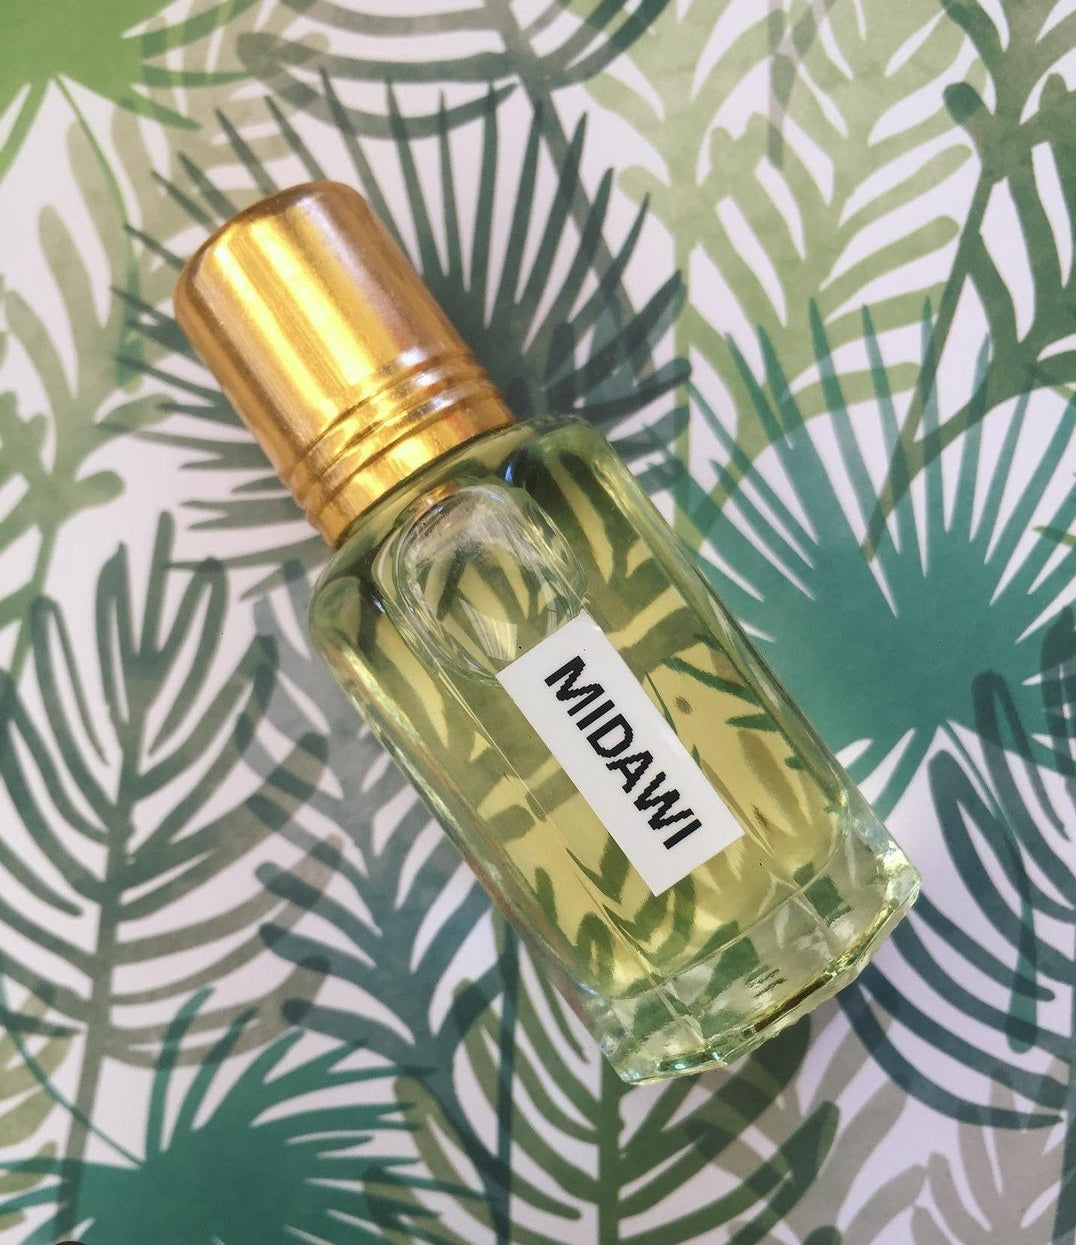 Midawi Perfume Oil / Attar - Concentrated Perfume oil - Alcohol free